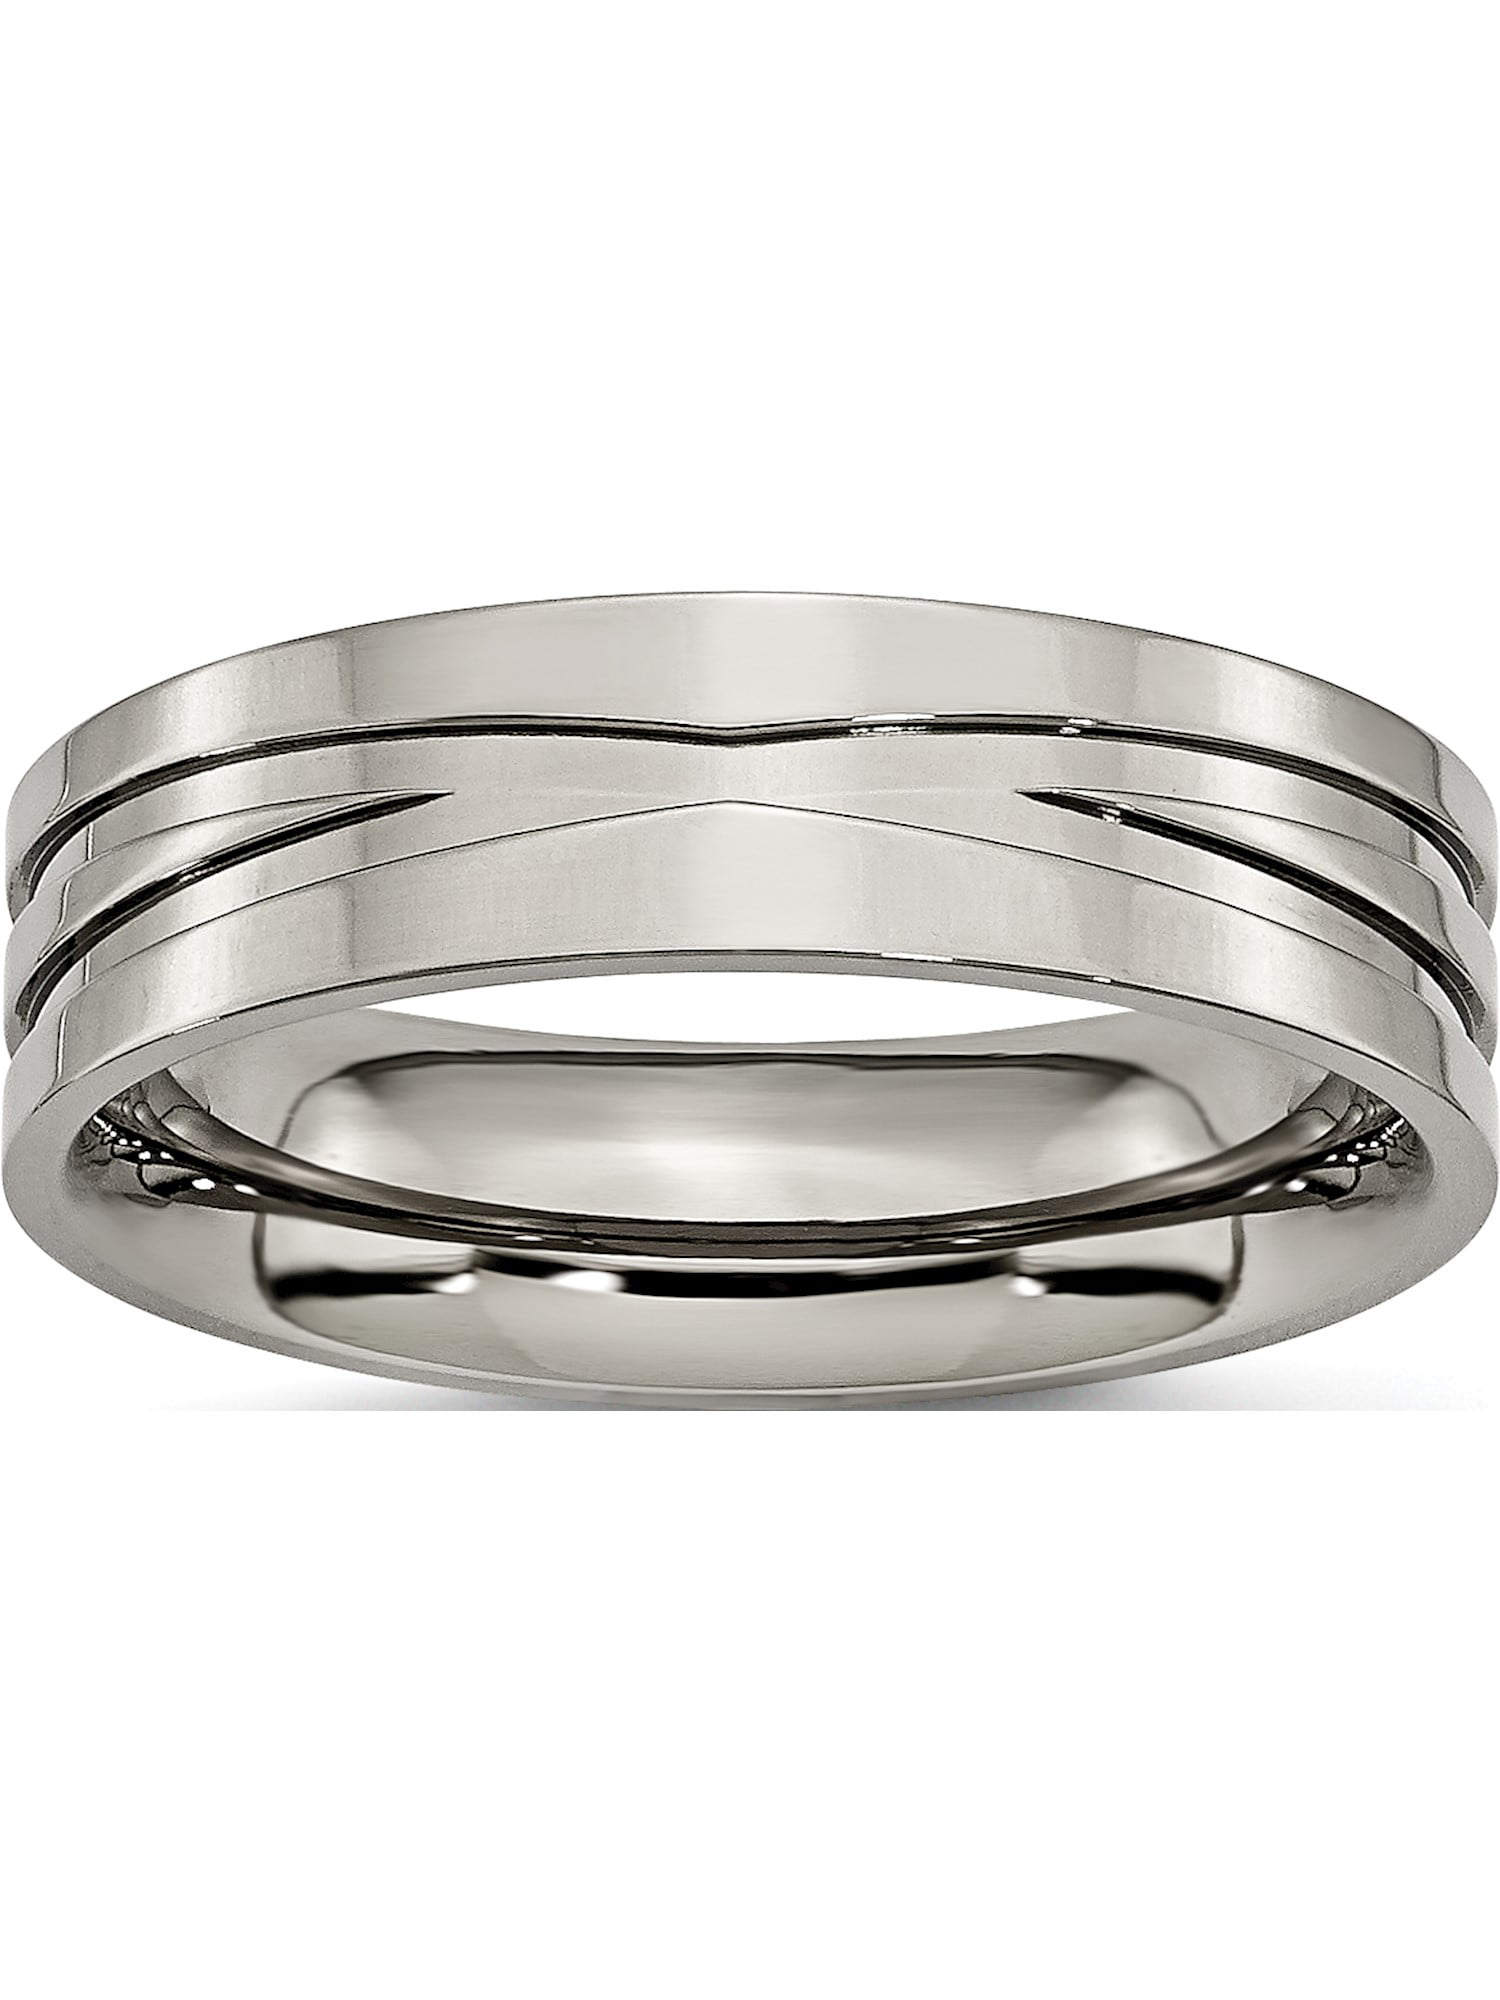 Titanium 6mm Grooved Satin and Polished Band Size 6.5 Length Width 6 